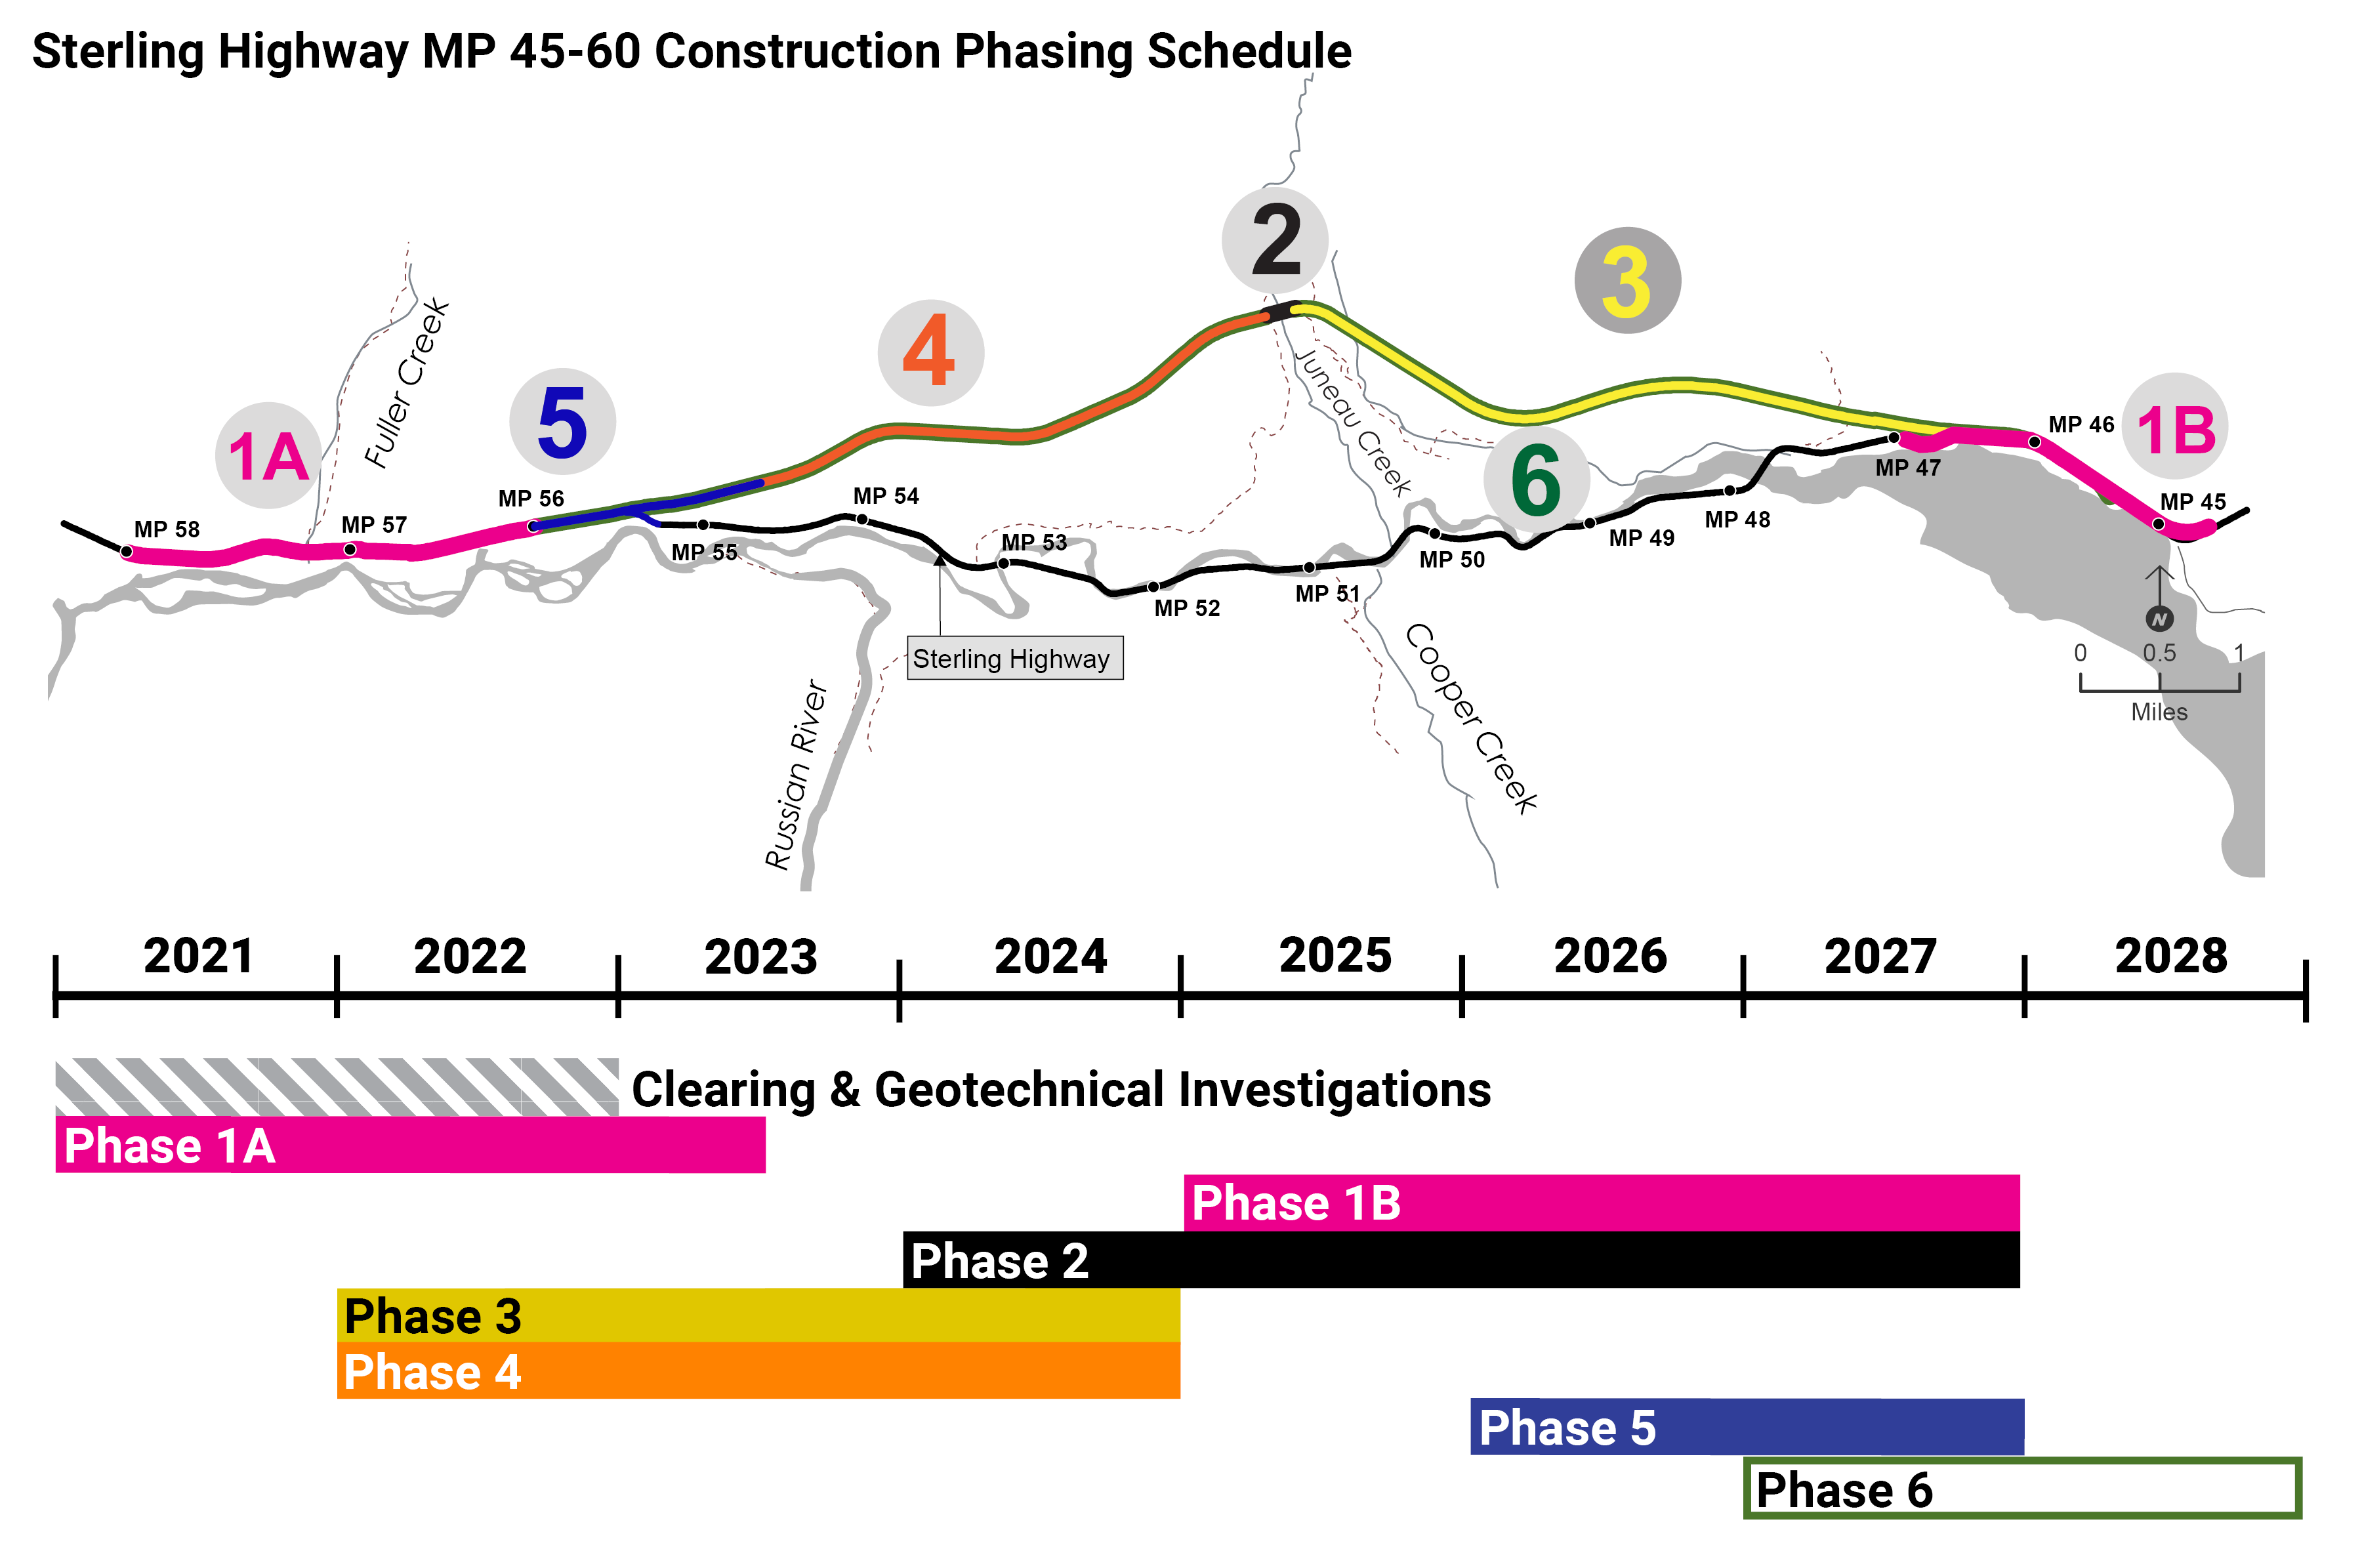 Project Schedule Phases 1 - Phase 6. Phase 1A Design 2019–2020, Construction 2021–2023, Phase 1B
Design 2019–2022, Construction 2024–2026, Phase 2 Design 2023–2023, Construction 2023–2026, Pioneer Roads Design 2021 – 2022, Construction 2022, Phases 3–4 Design 2021 – 2022, Construction 2022–2024, Phase 5 Design 2022–2024, Construction 2025–2026, and Phase 6, Design 2022–2025, Construction 2026–2027.